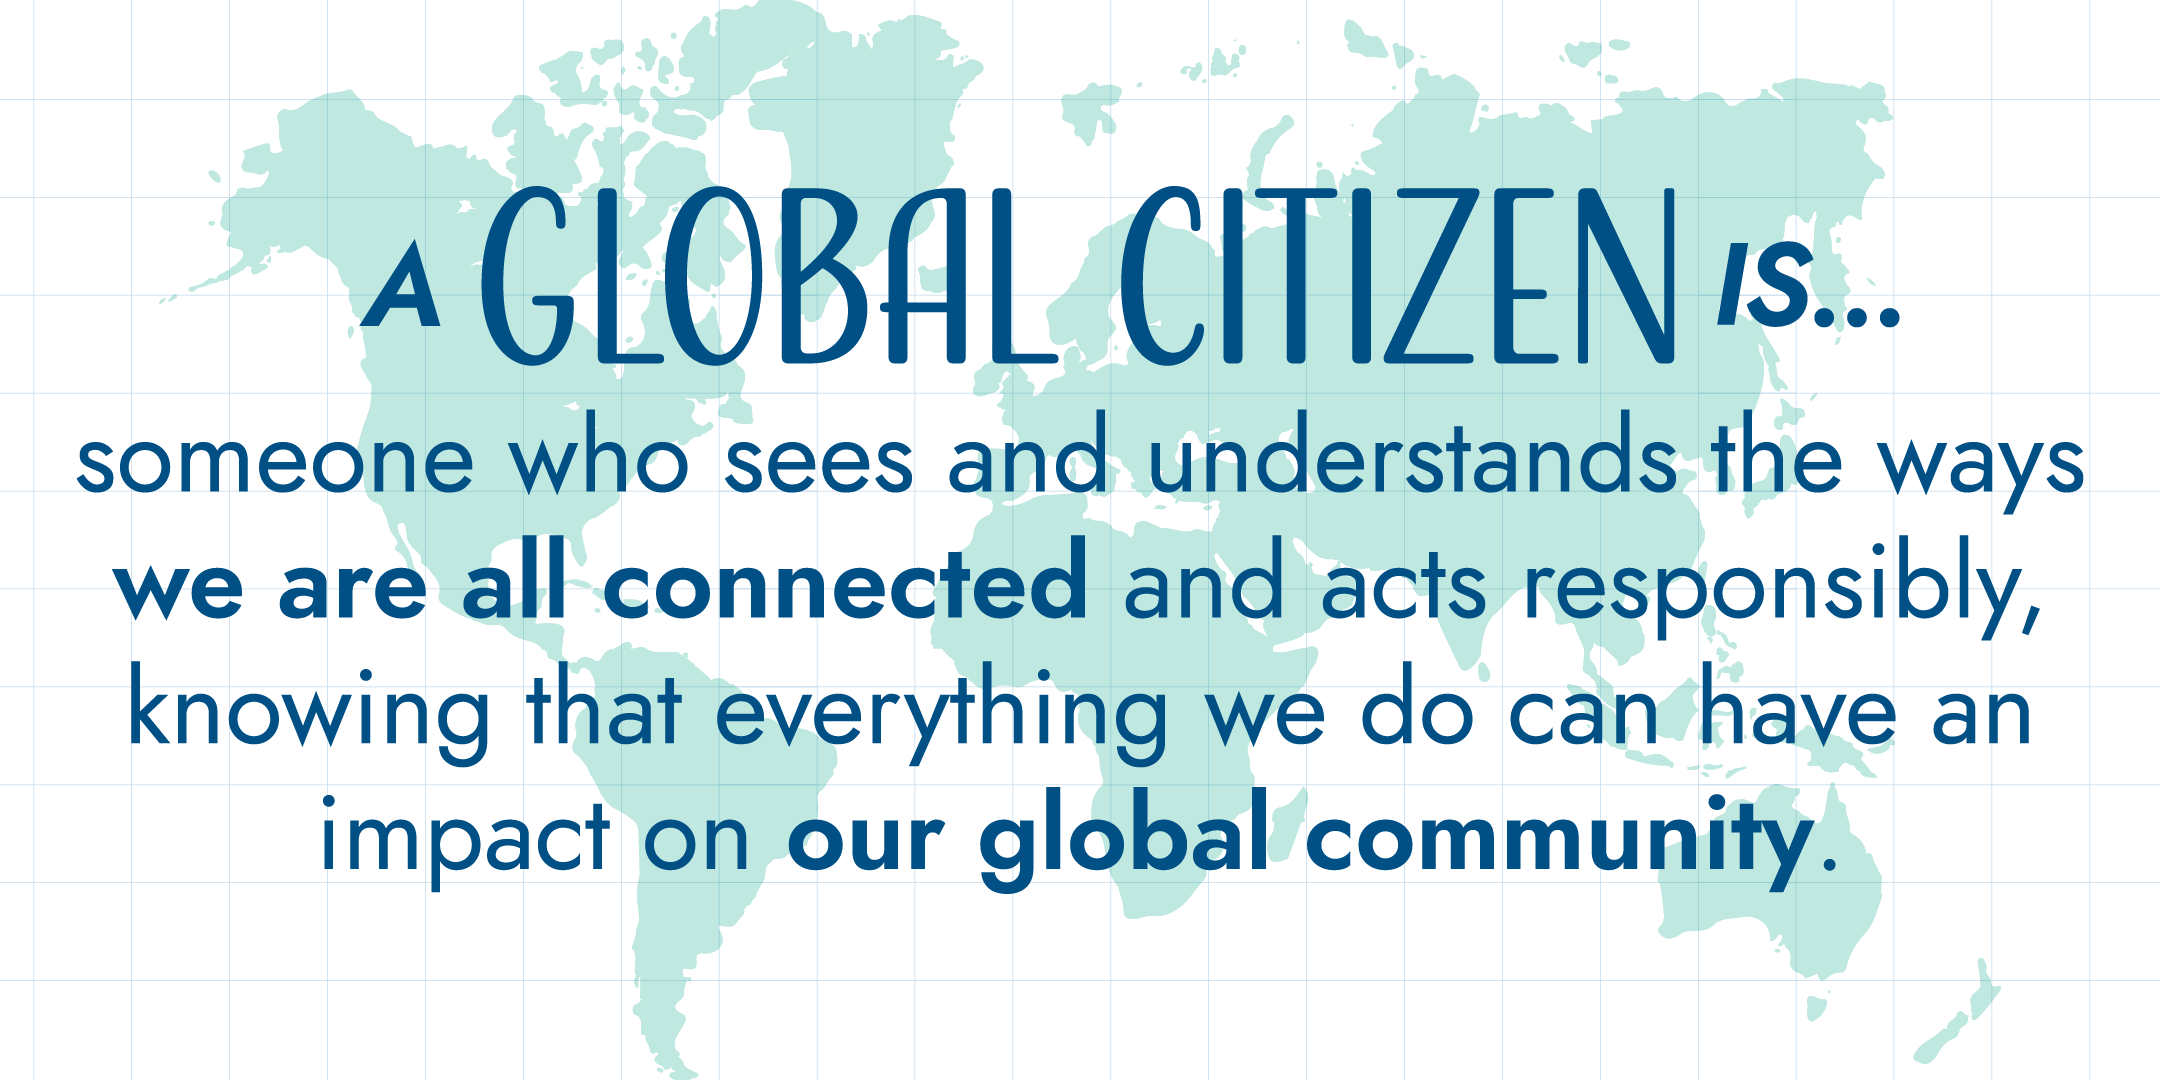 graphic reads: A global citizen is someone who sees and understands the ways we are all connected and acts responsibly, knowing that everything we do can have an impact on our global community.